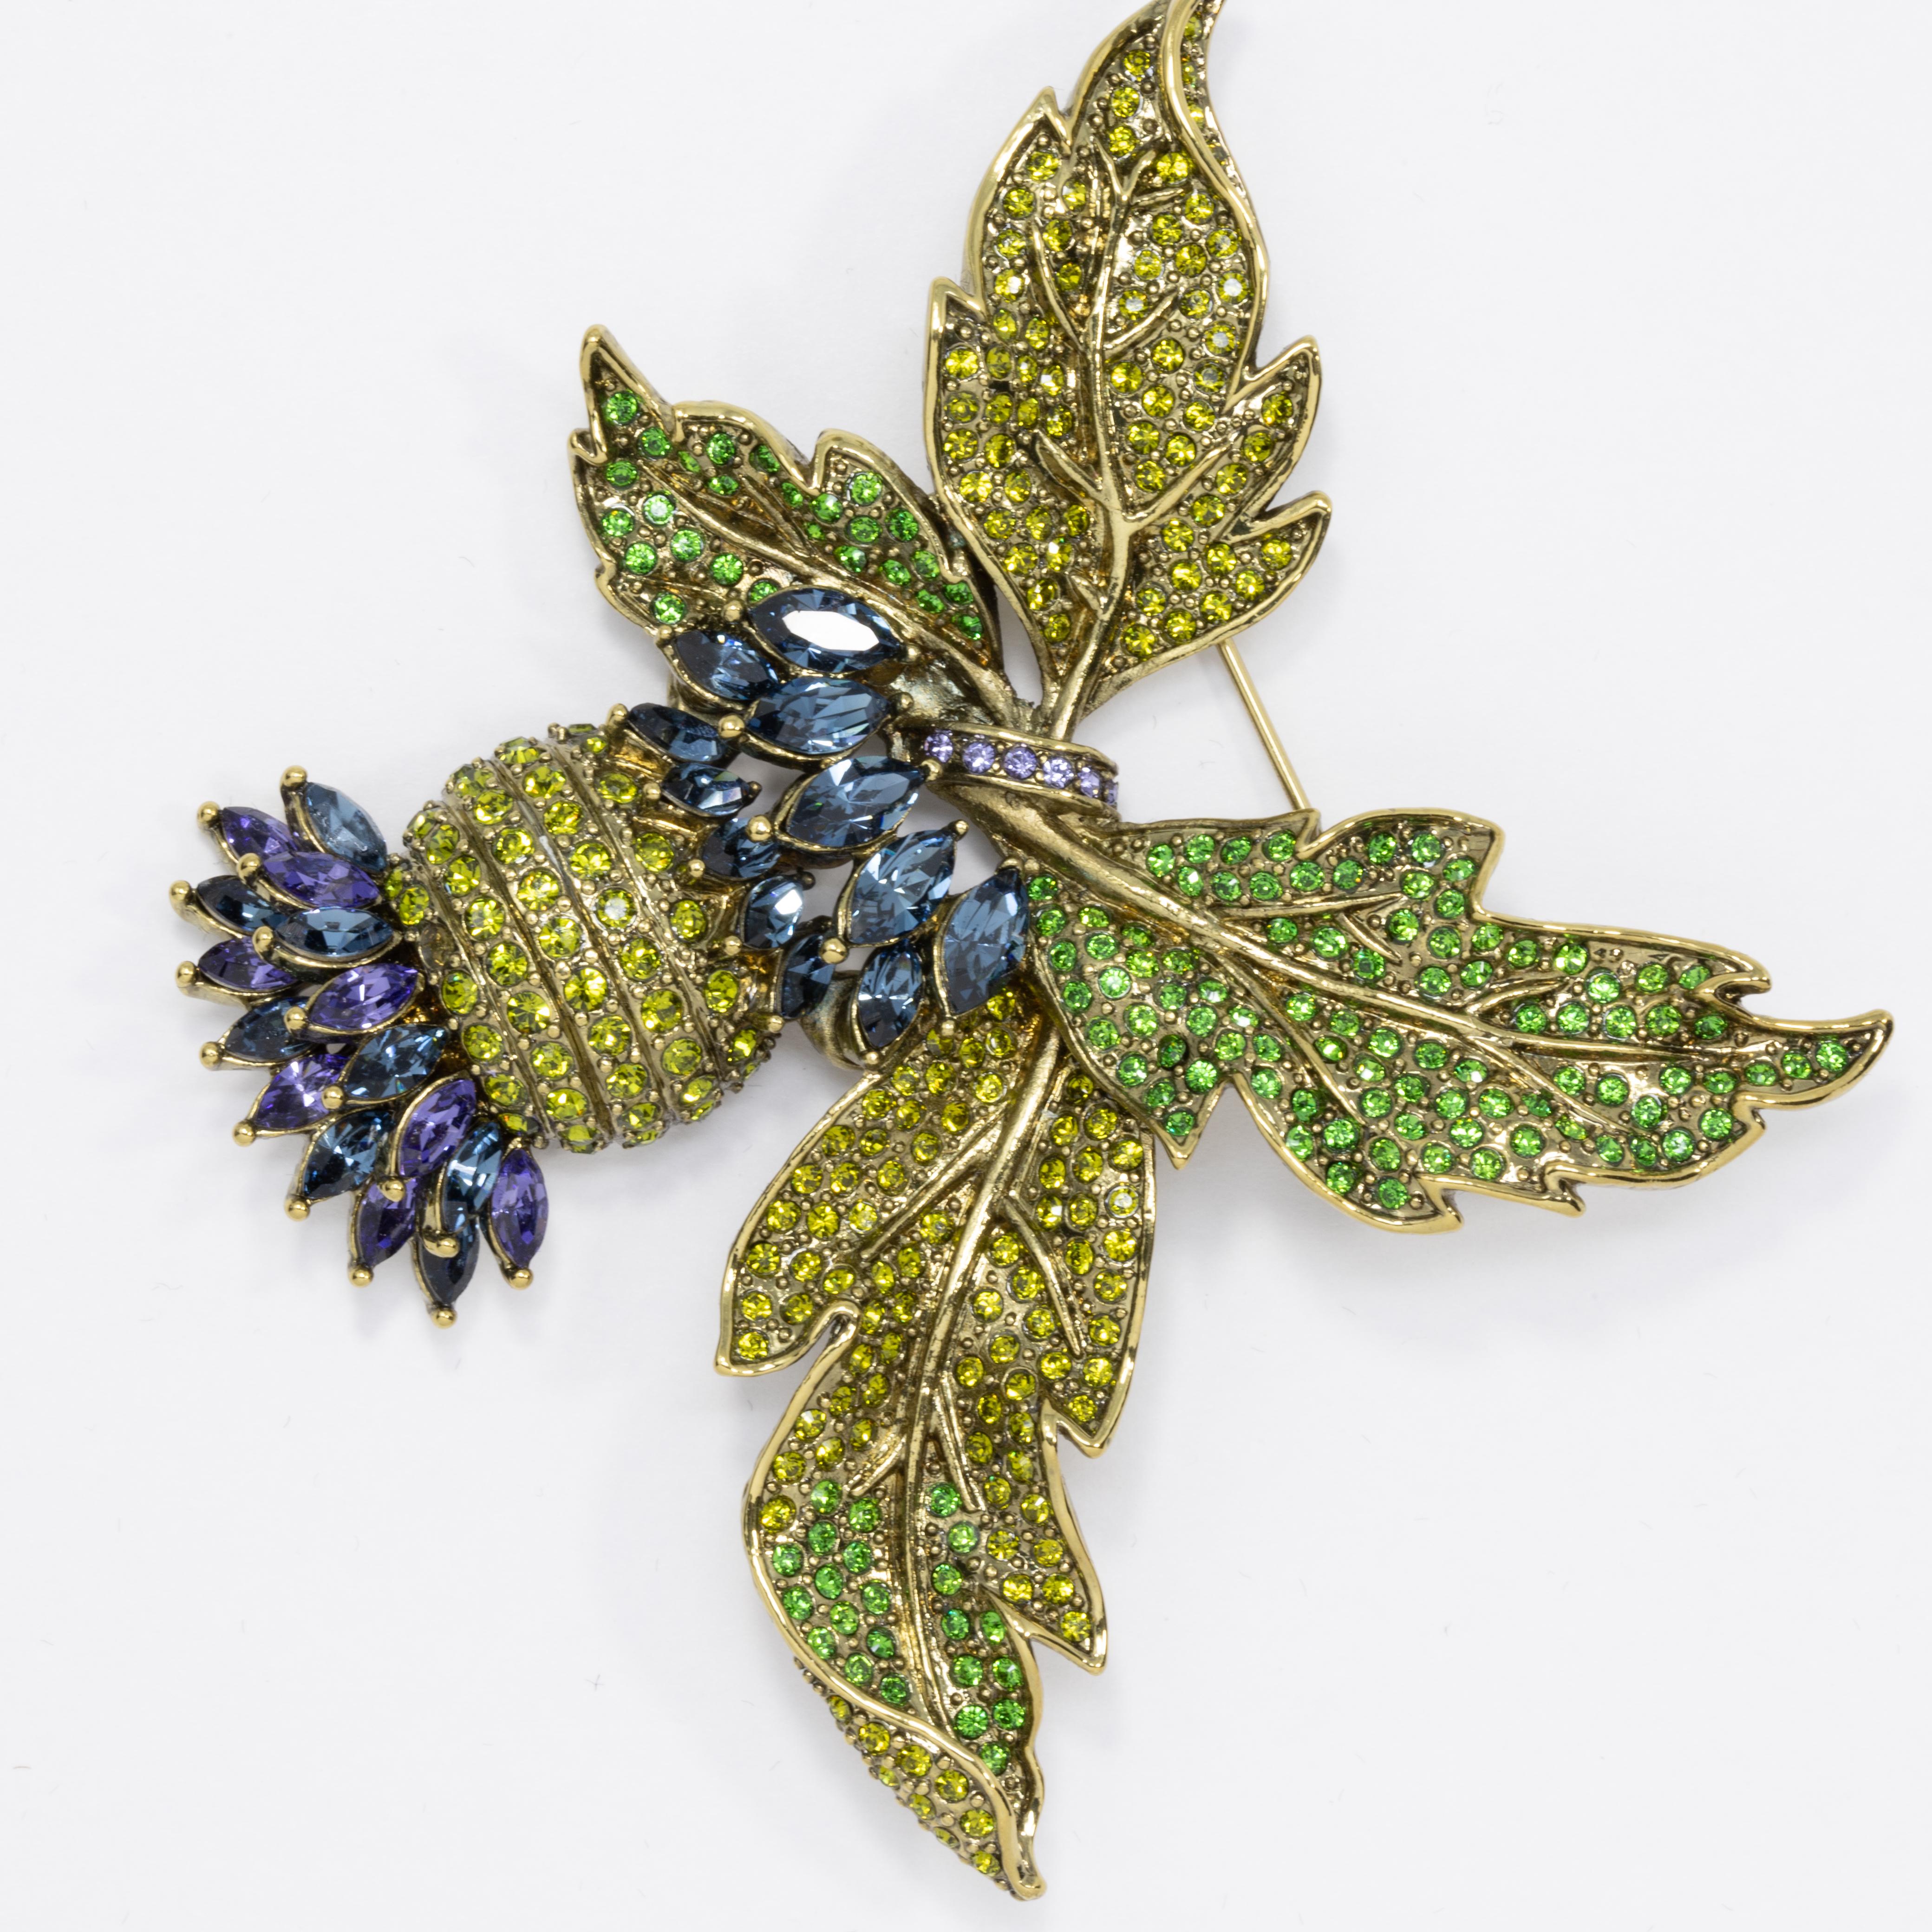 A sparkling pin brooch from Heidi Daus! An extravagant cluster of leaves and fruit, decorated with pave olive, peridot, and violet crystals.

Limited-time, retired collection.

Hallmarks: Heidi Daus, CN